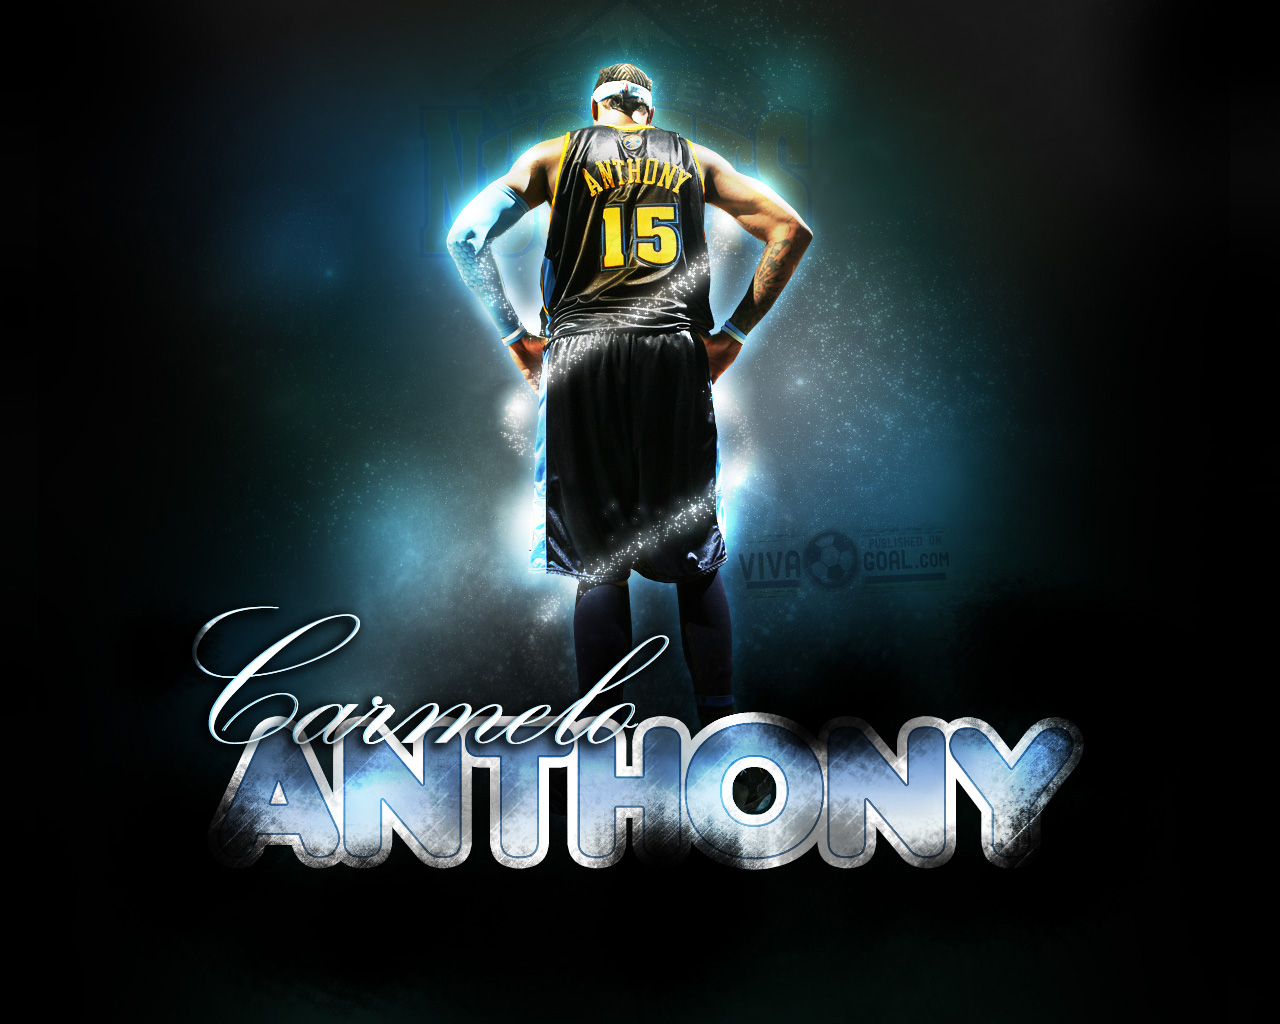 Carmelo Anthony Basketball Wallpapers 1280x1024